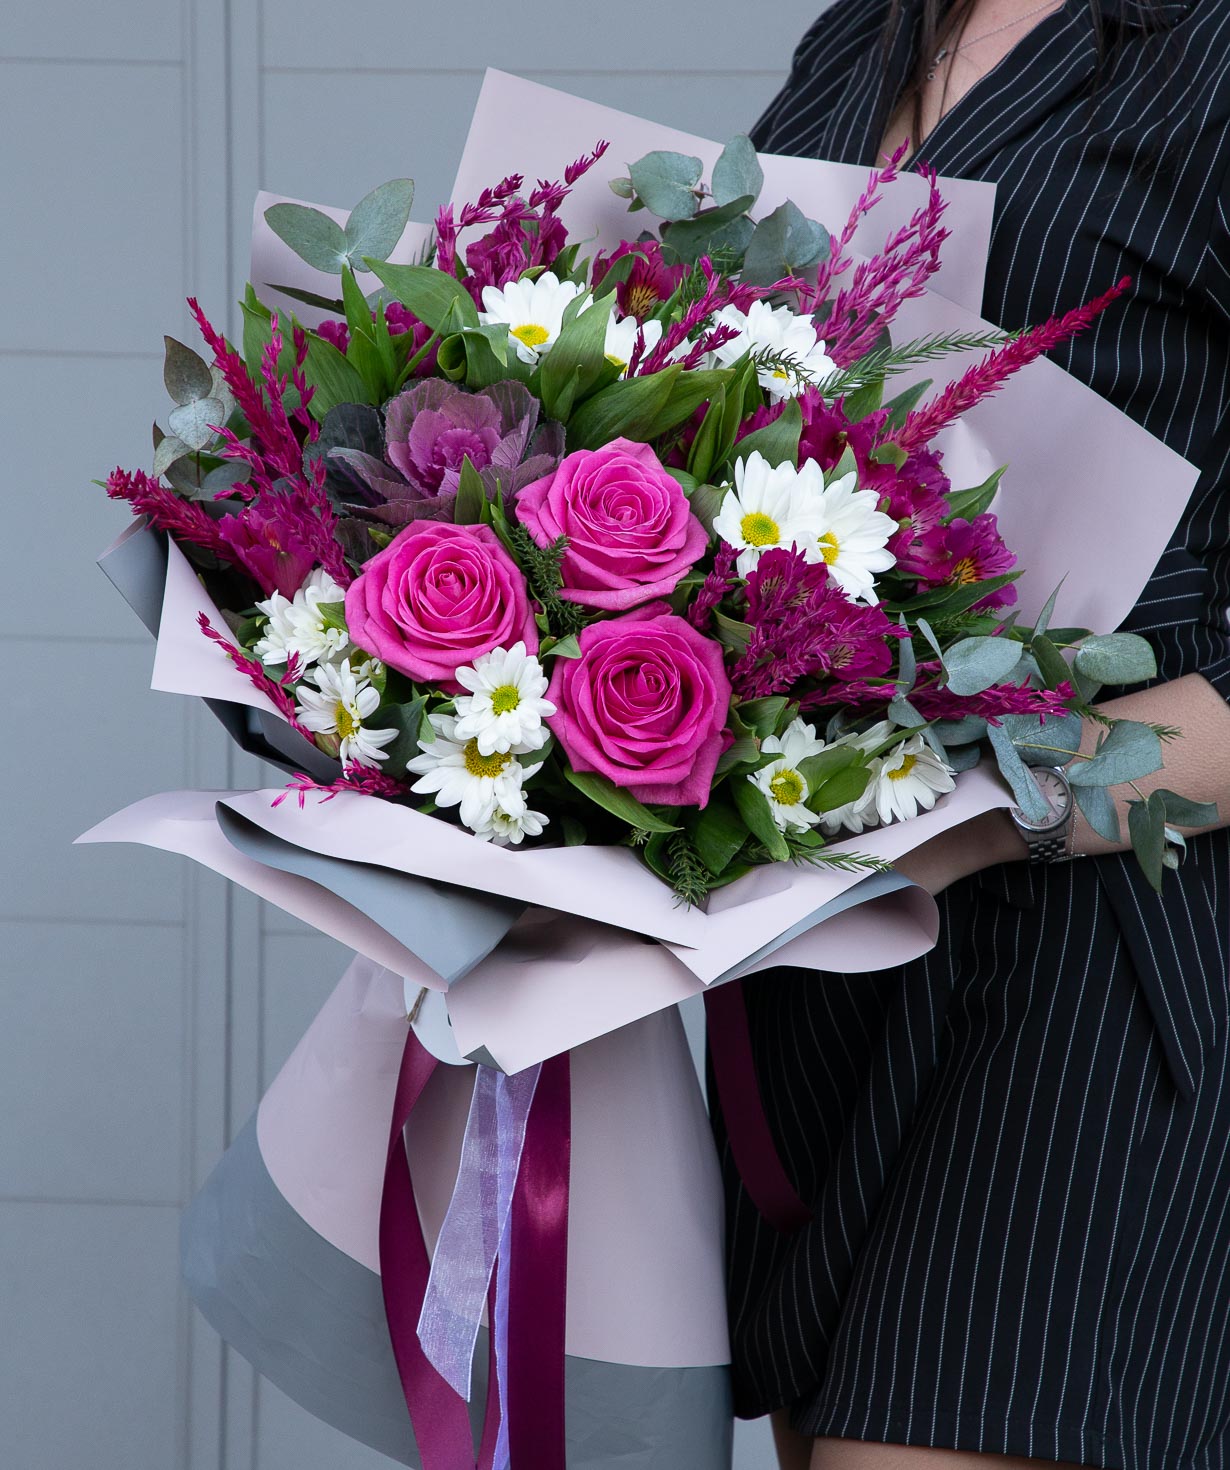 Bouquet `Morshin` with  roses and alstroemerias